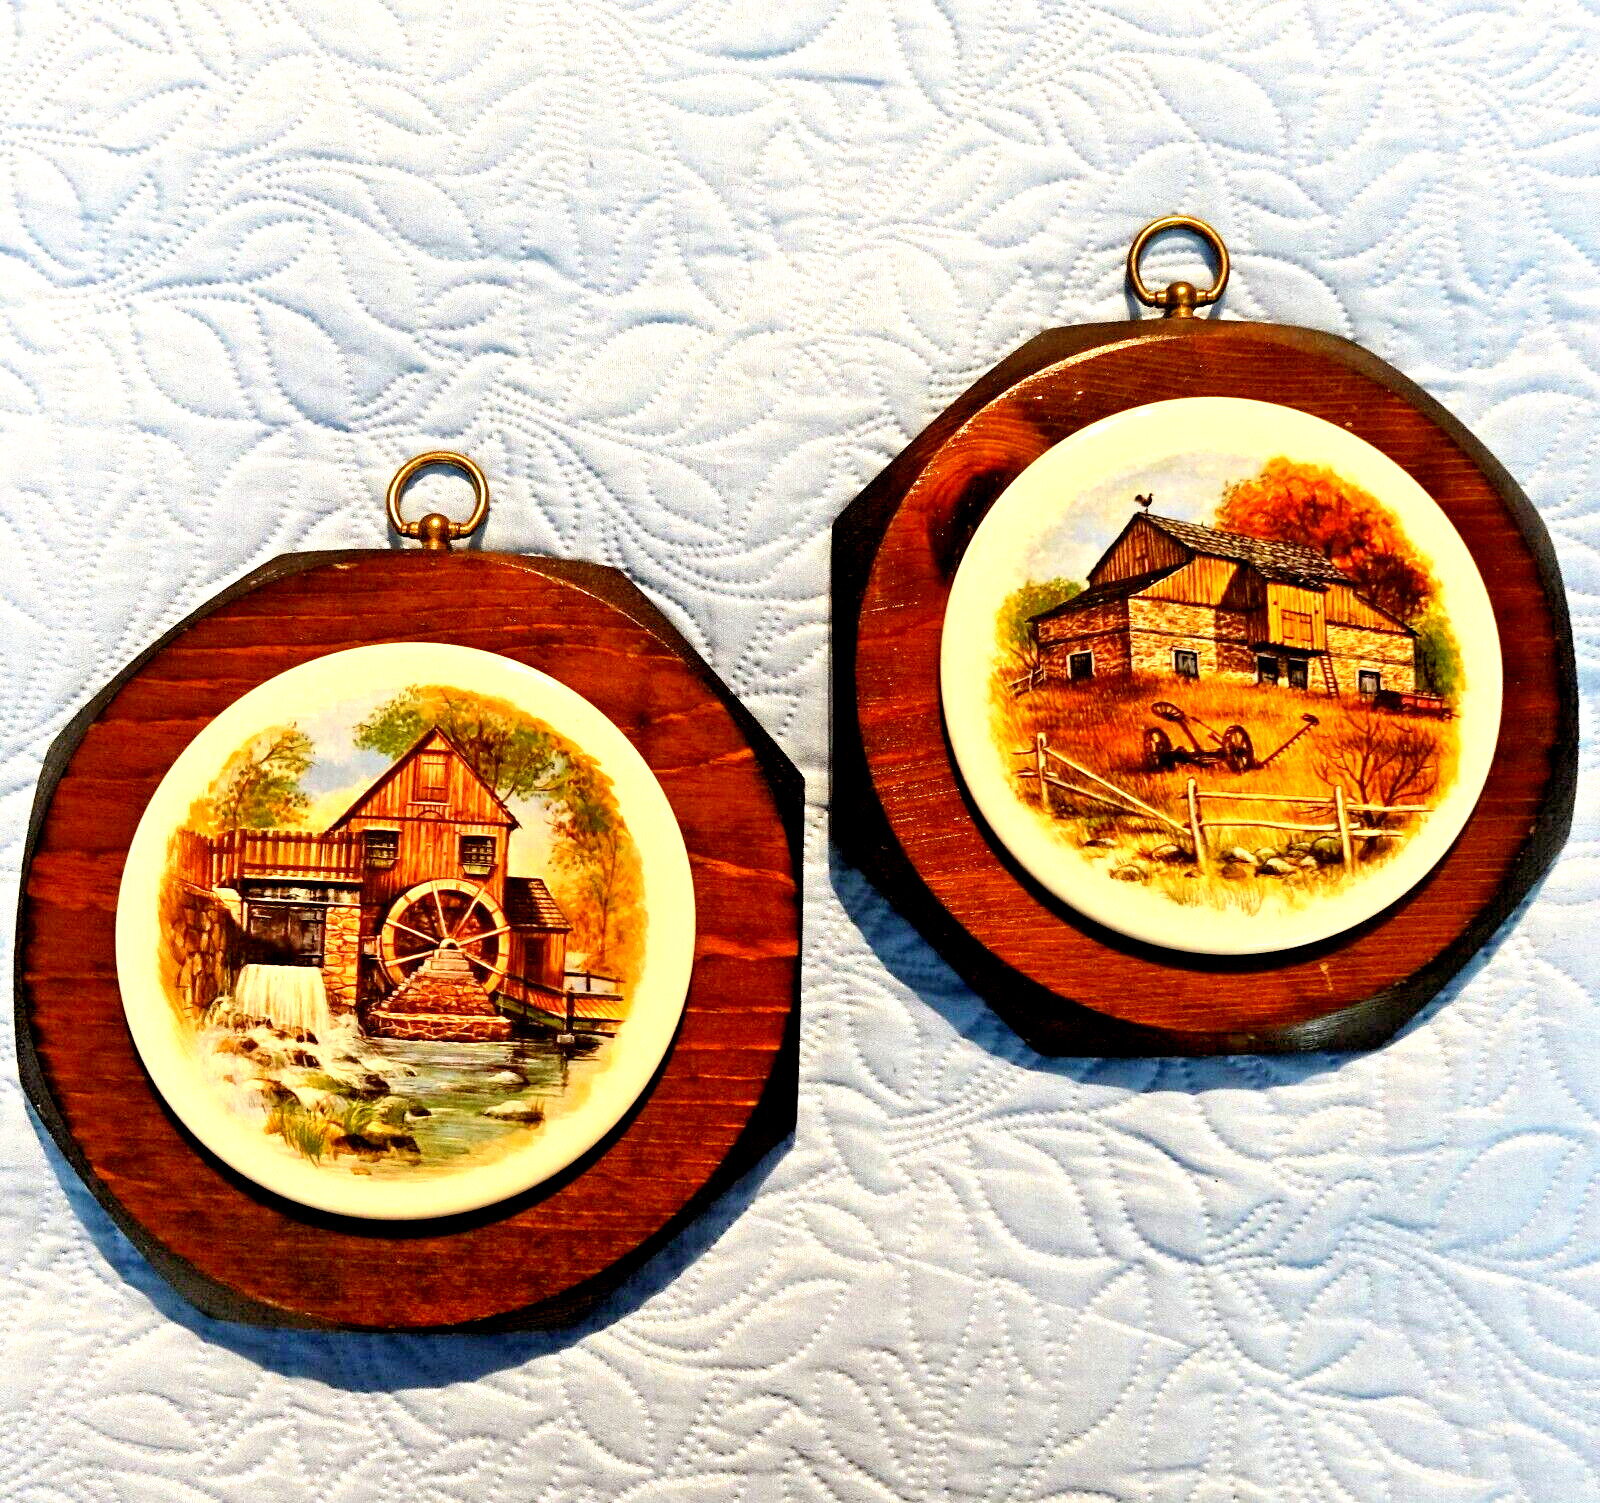 2 Vintage Ceramic & Wood 1970s Country Rural Farm Scenes Wall Plaques Trivets